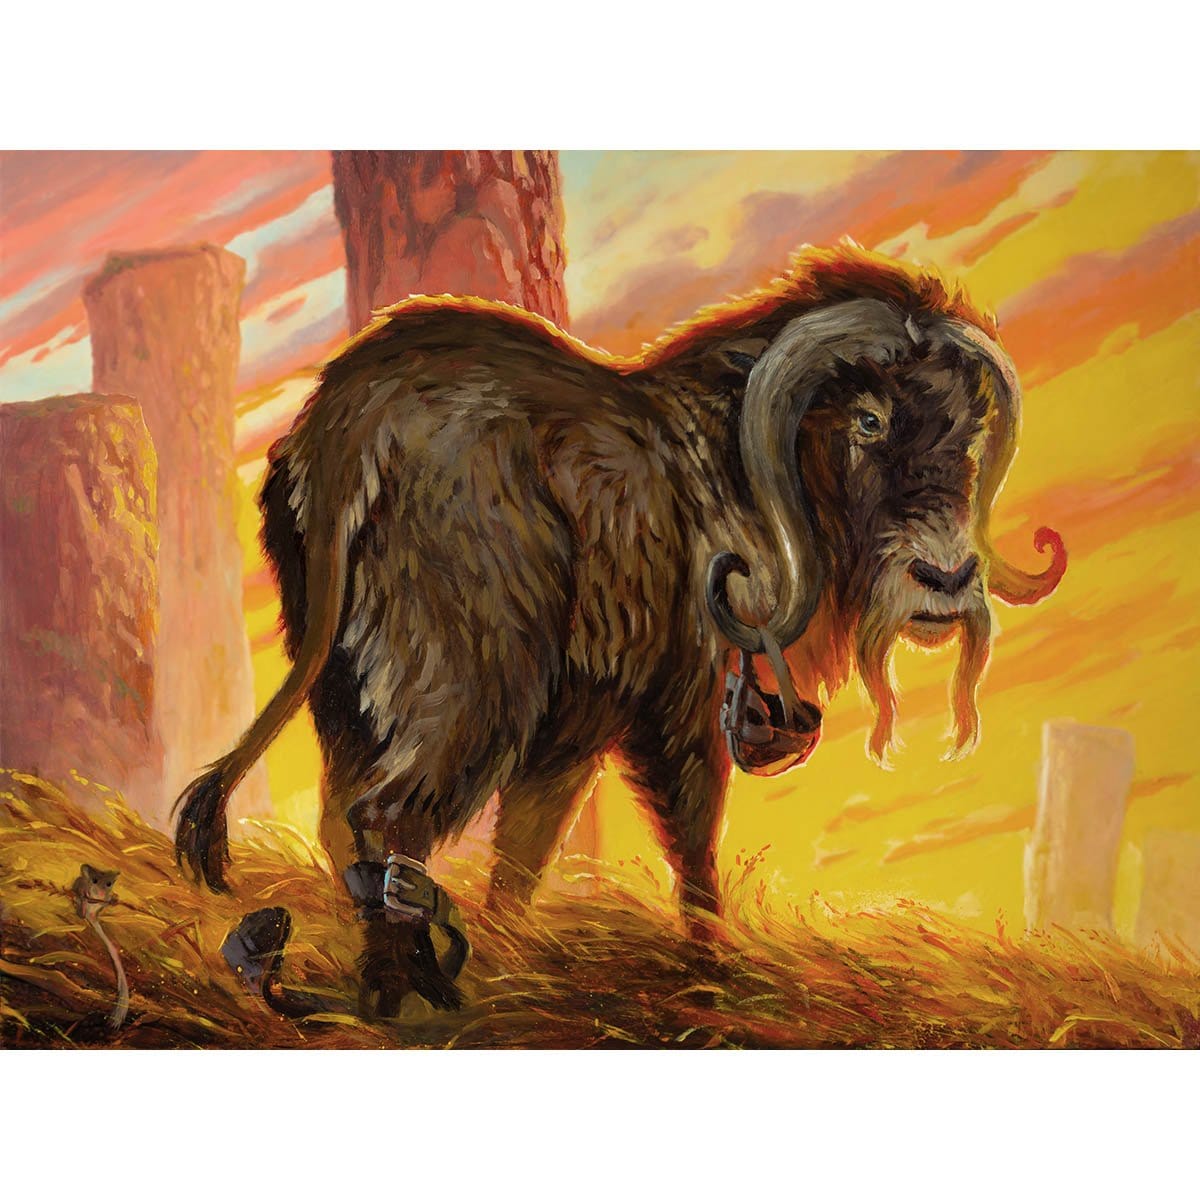 Ox Token Print - Print - Original Magic Art - Accessories for Magic the Gathering and other card games